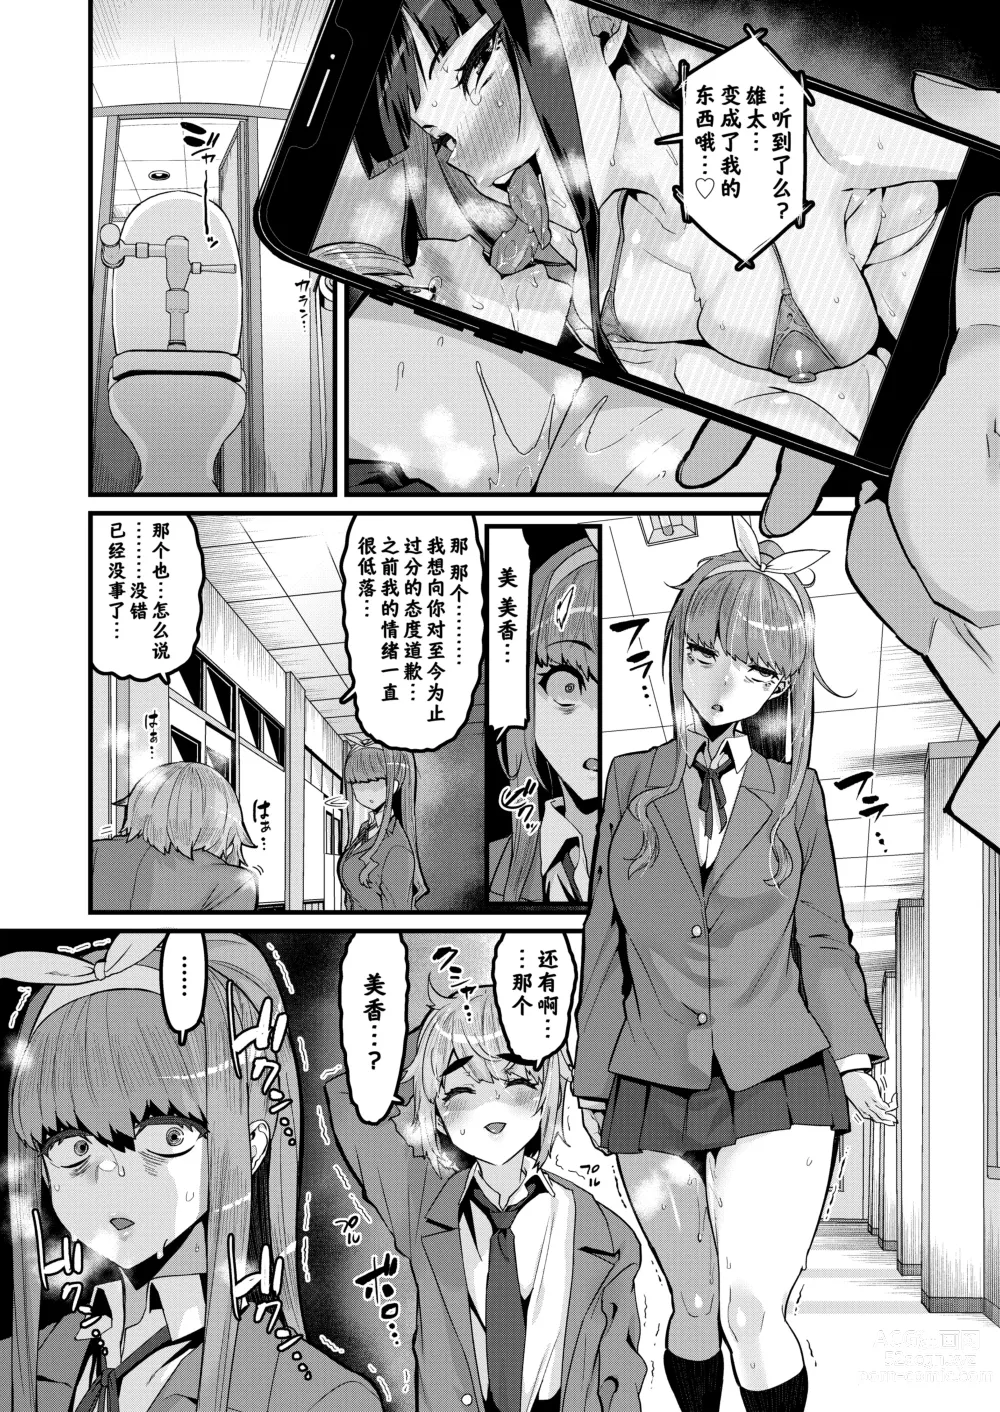 Page 26 of doujinshi 青梅竹马到此为止